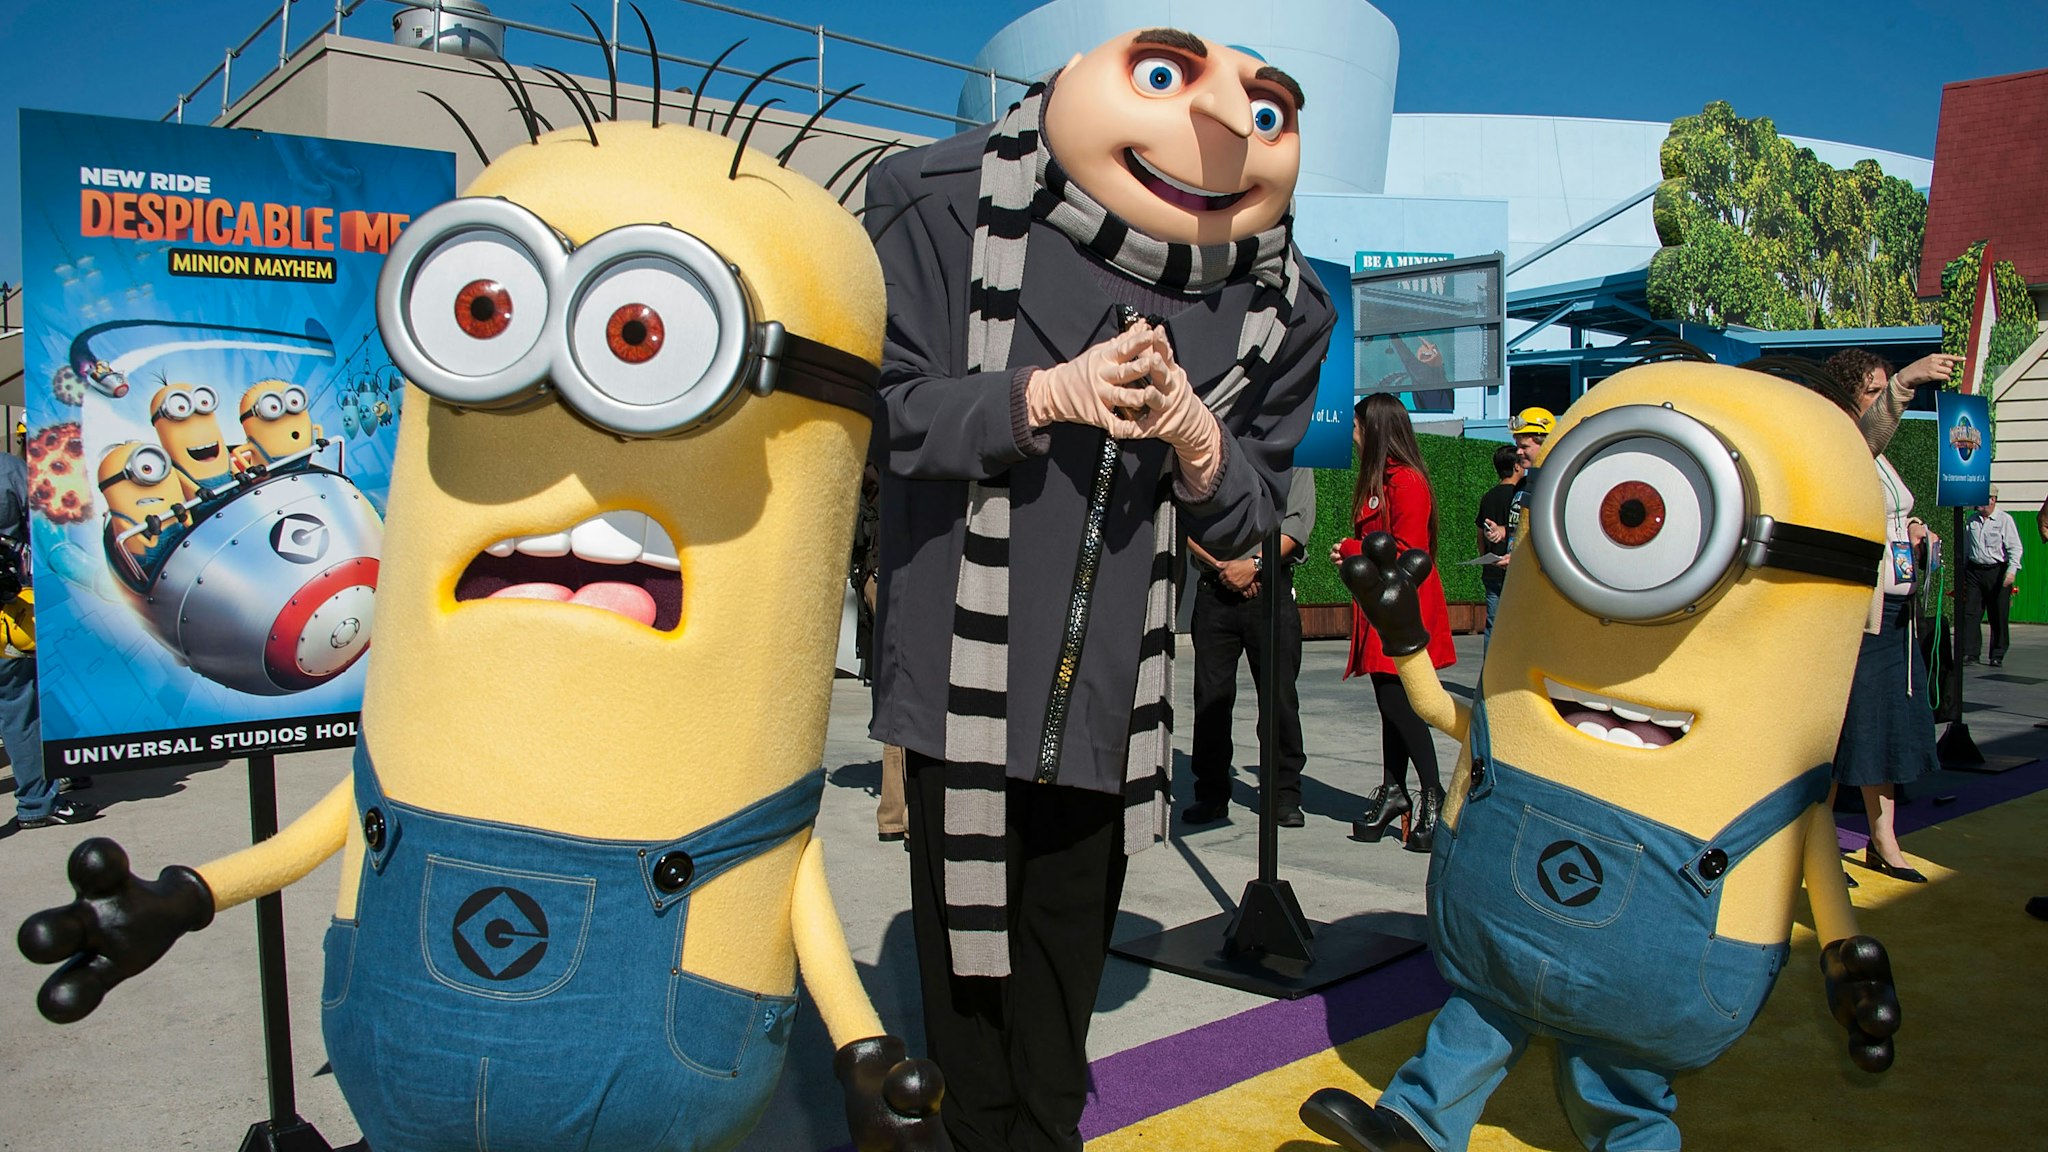 Gru and his Minion attends Universal Studios Hollywood Celebrates The Premiere Of New 3D Ultra HD digital Animation Adventure "Despicable Me Minion Mayhem" at Universal Studios Hollywood on April 11, 2014 in Universal City, California. (Photo by Valerie Macon/Getty Images)